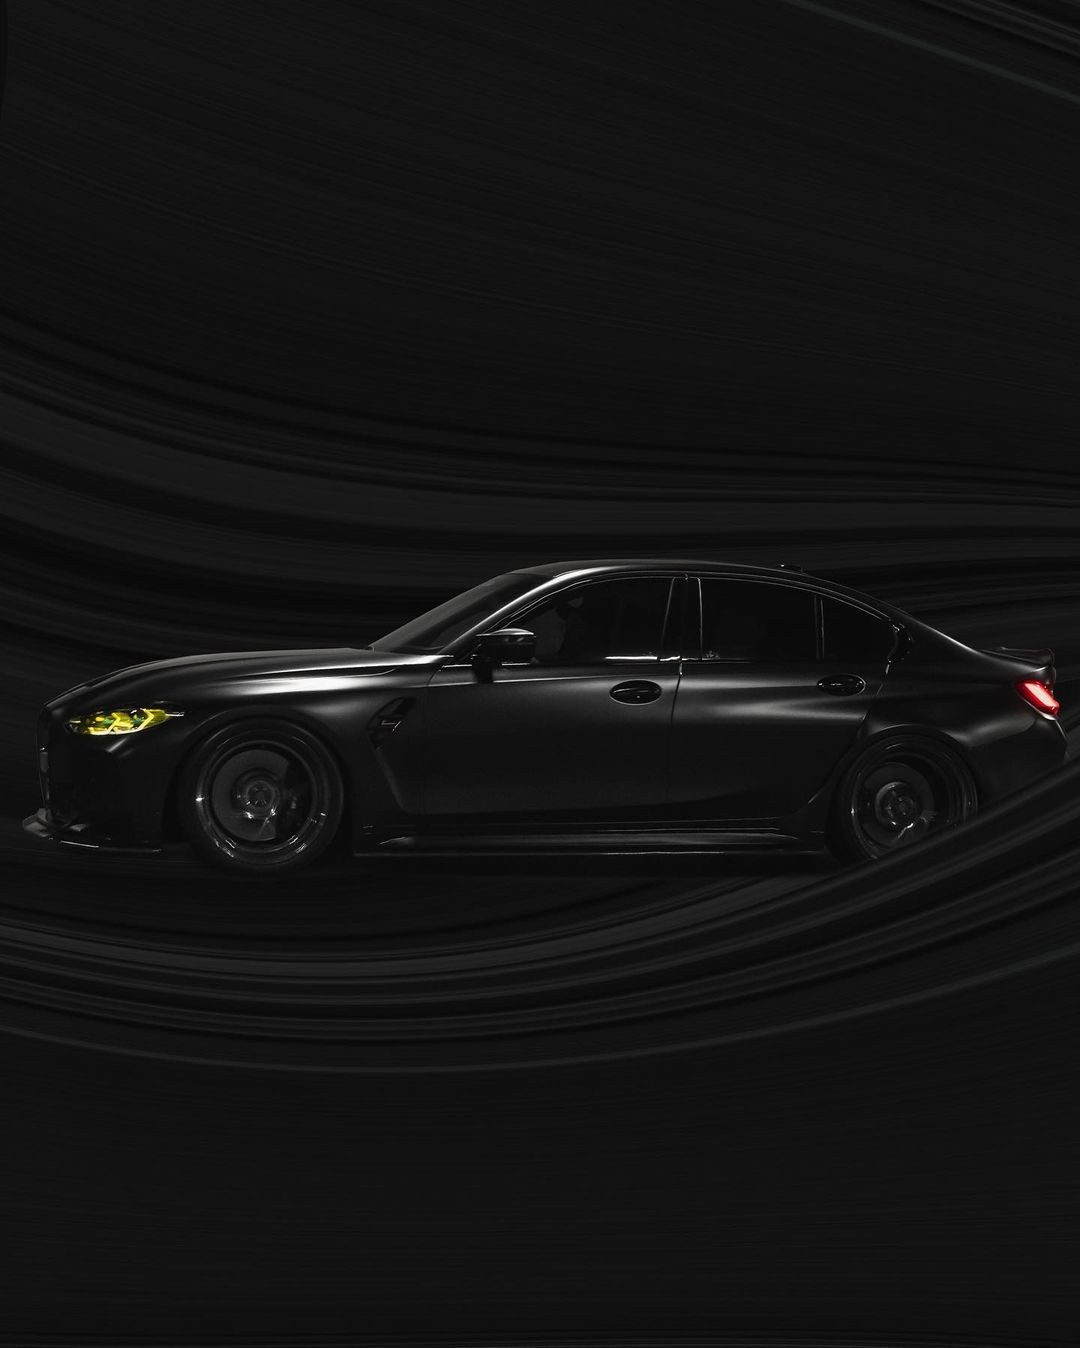 Murdered-Out BMW M3 Proves Less Is More, Sports Sedan Is Darker